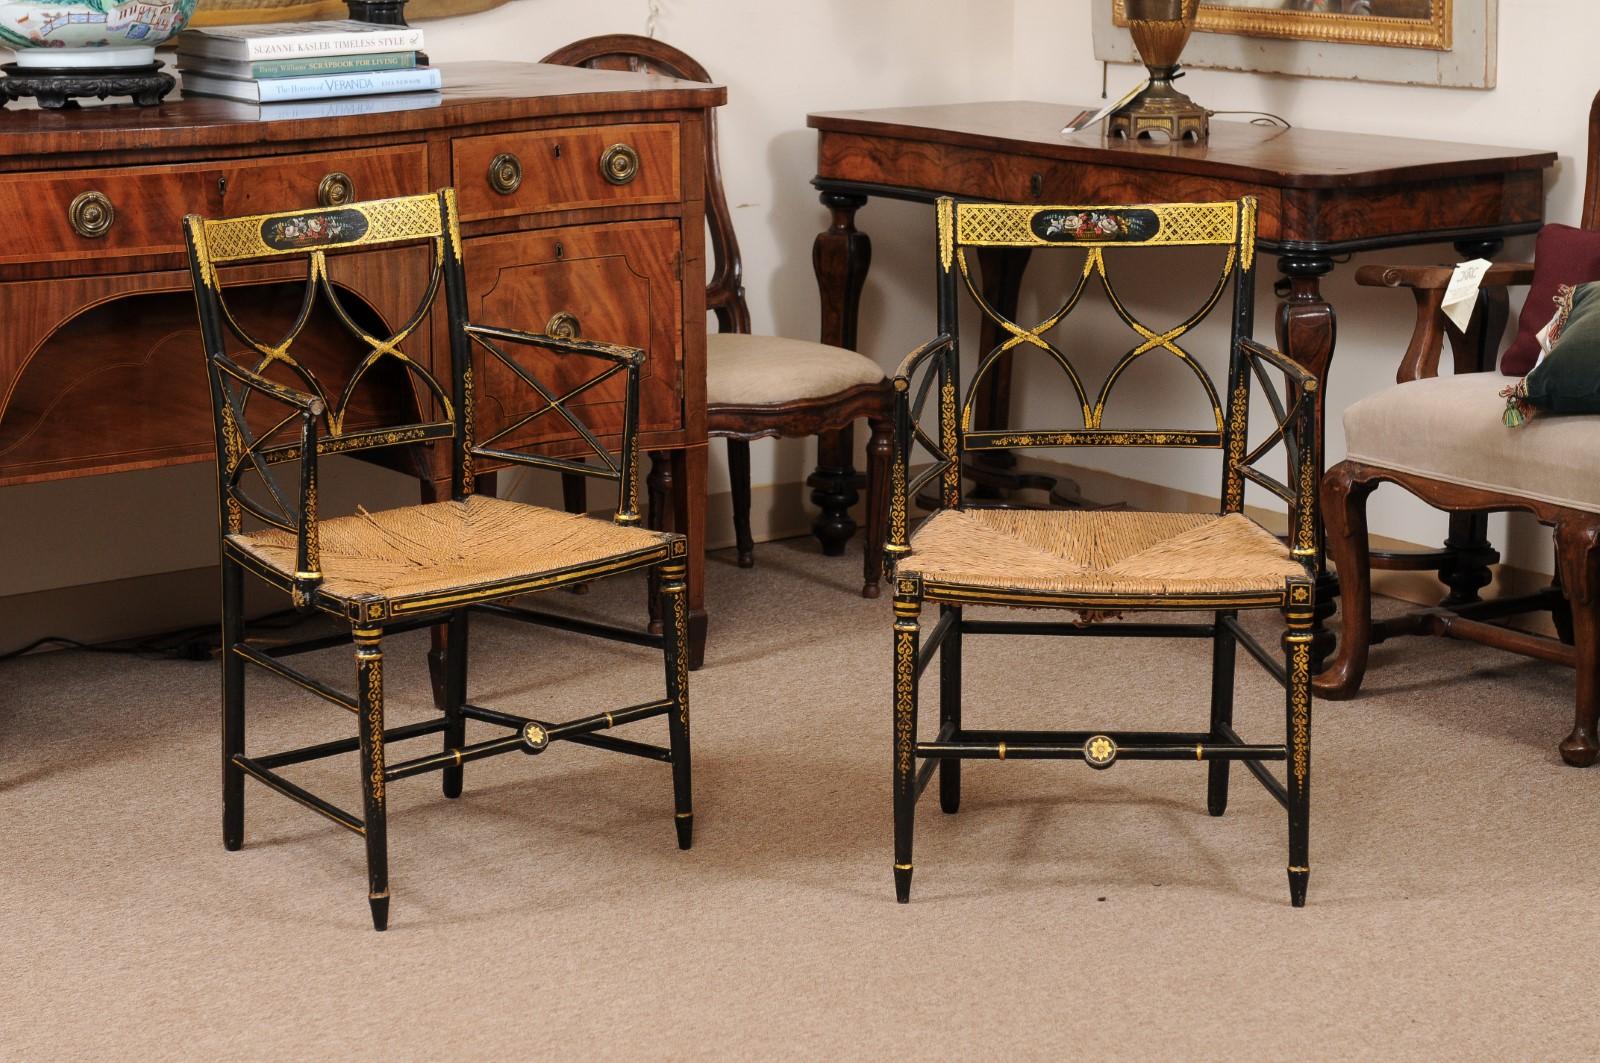 Pair of Regency Black Painted Arm Chairs with Floral Decoration & Rush Seats, England ca. 1820